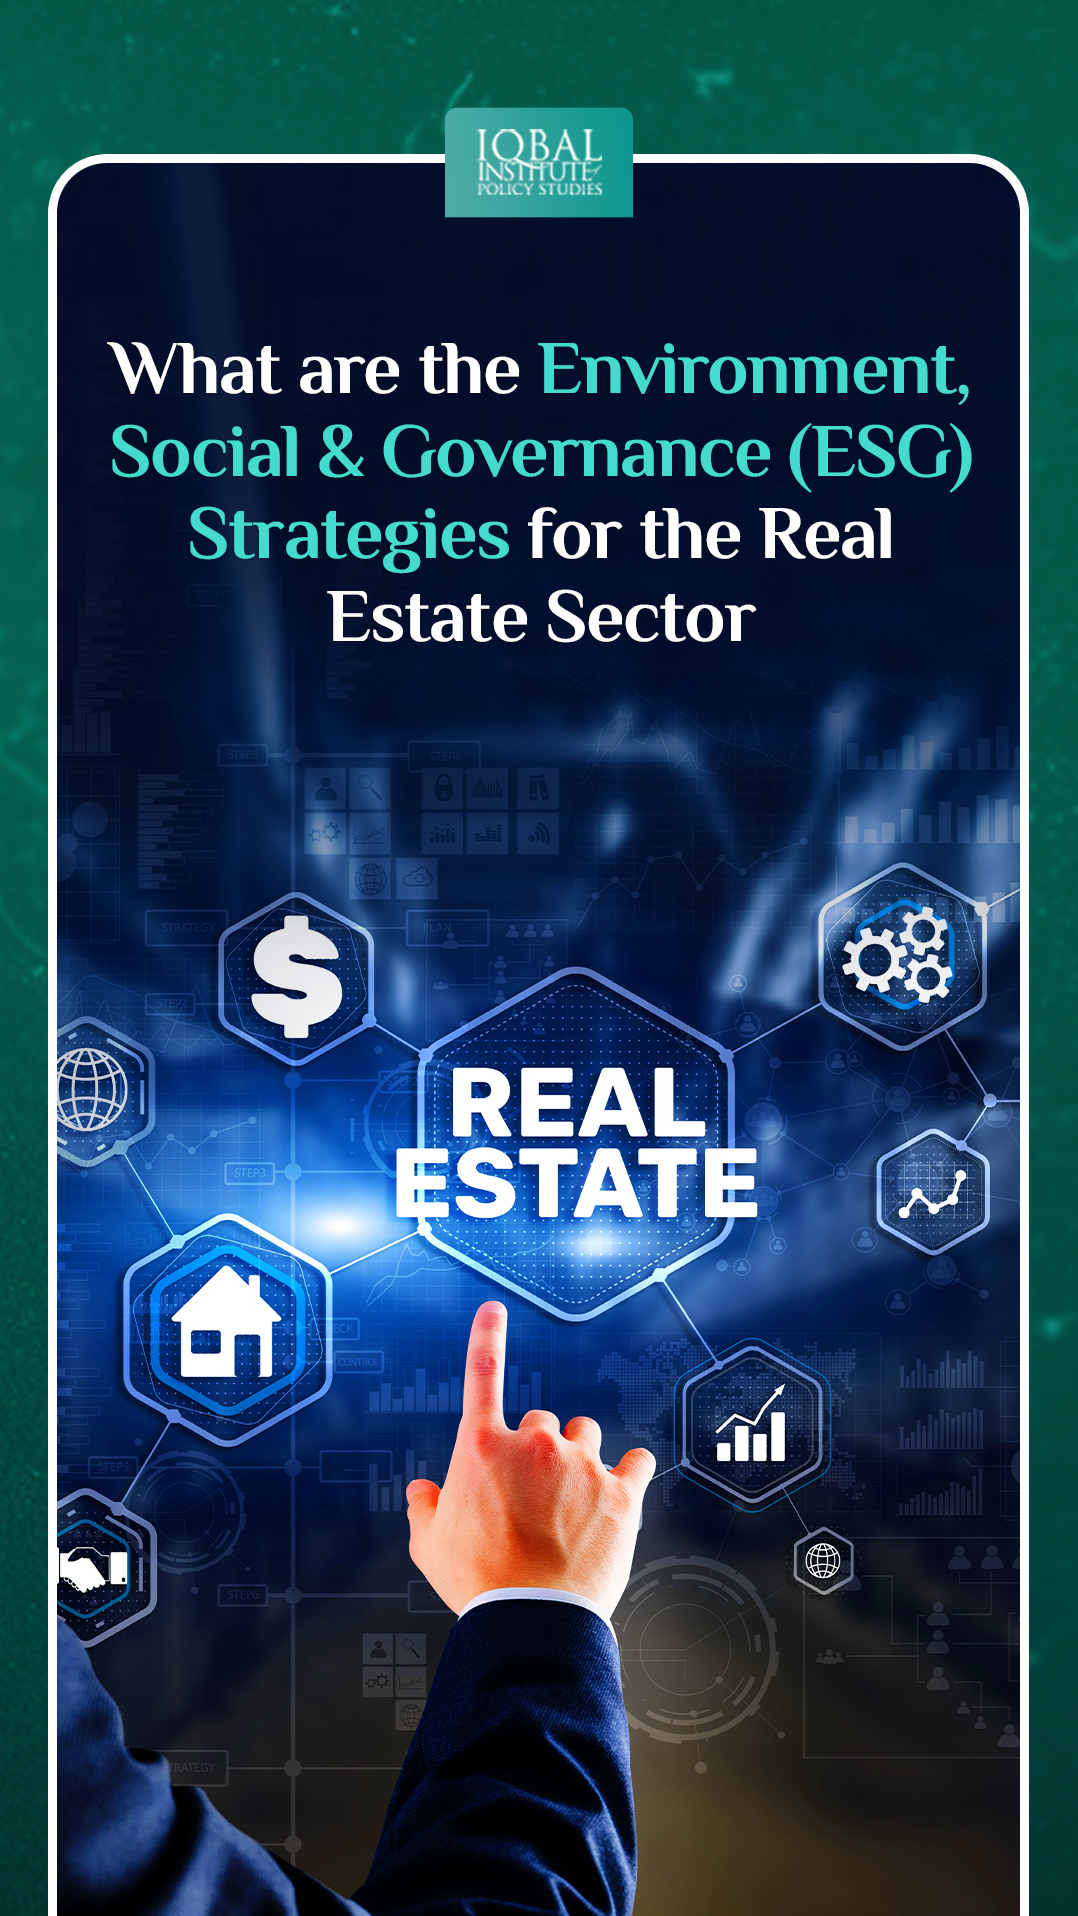 What are the Environment, Social and Governance (ESG) for Real the Estate Sector?